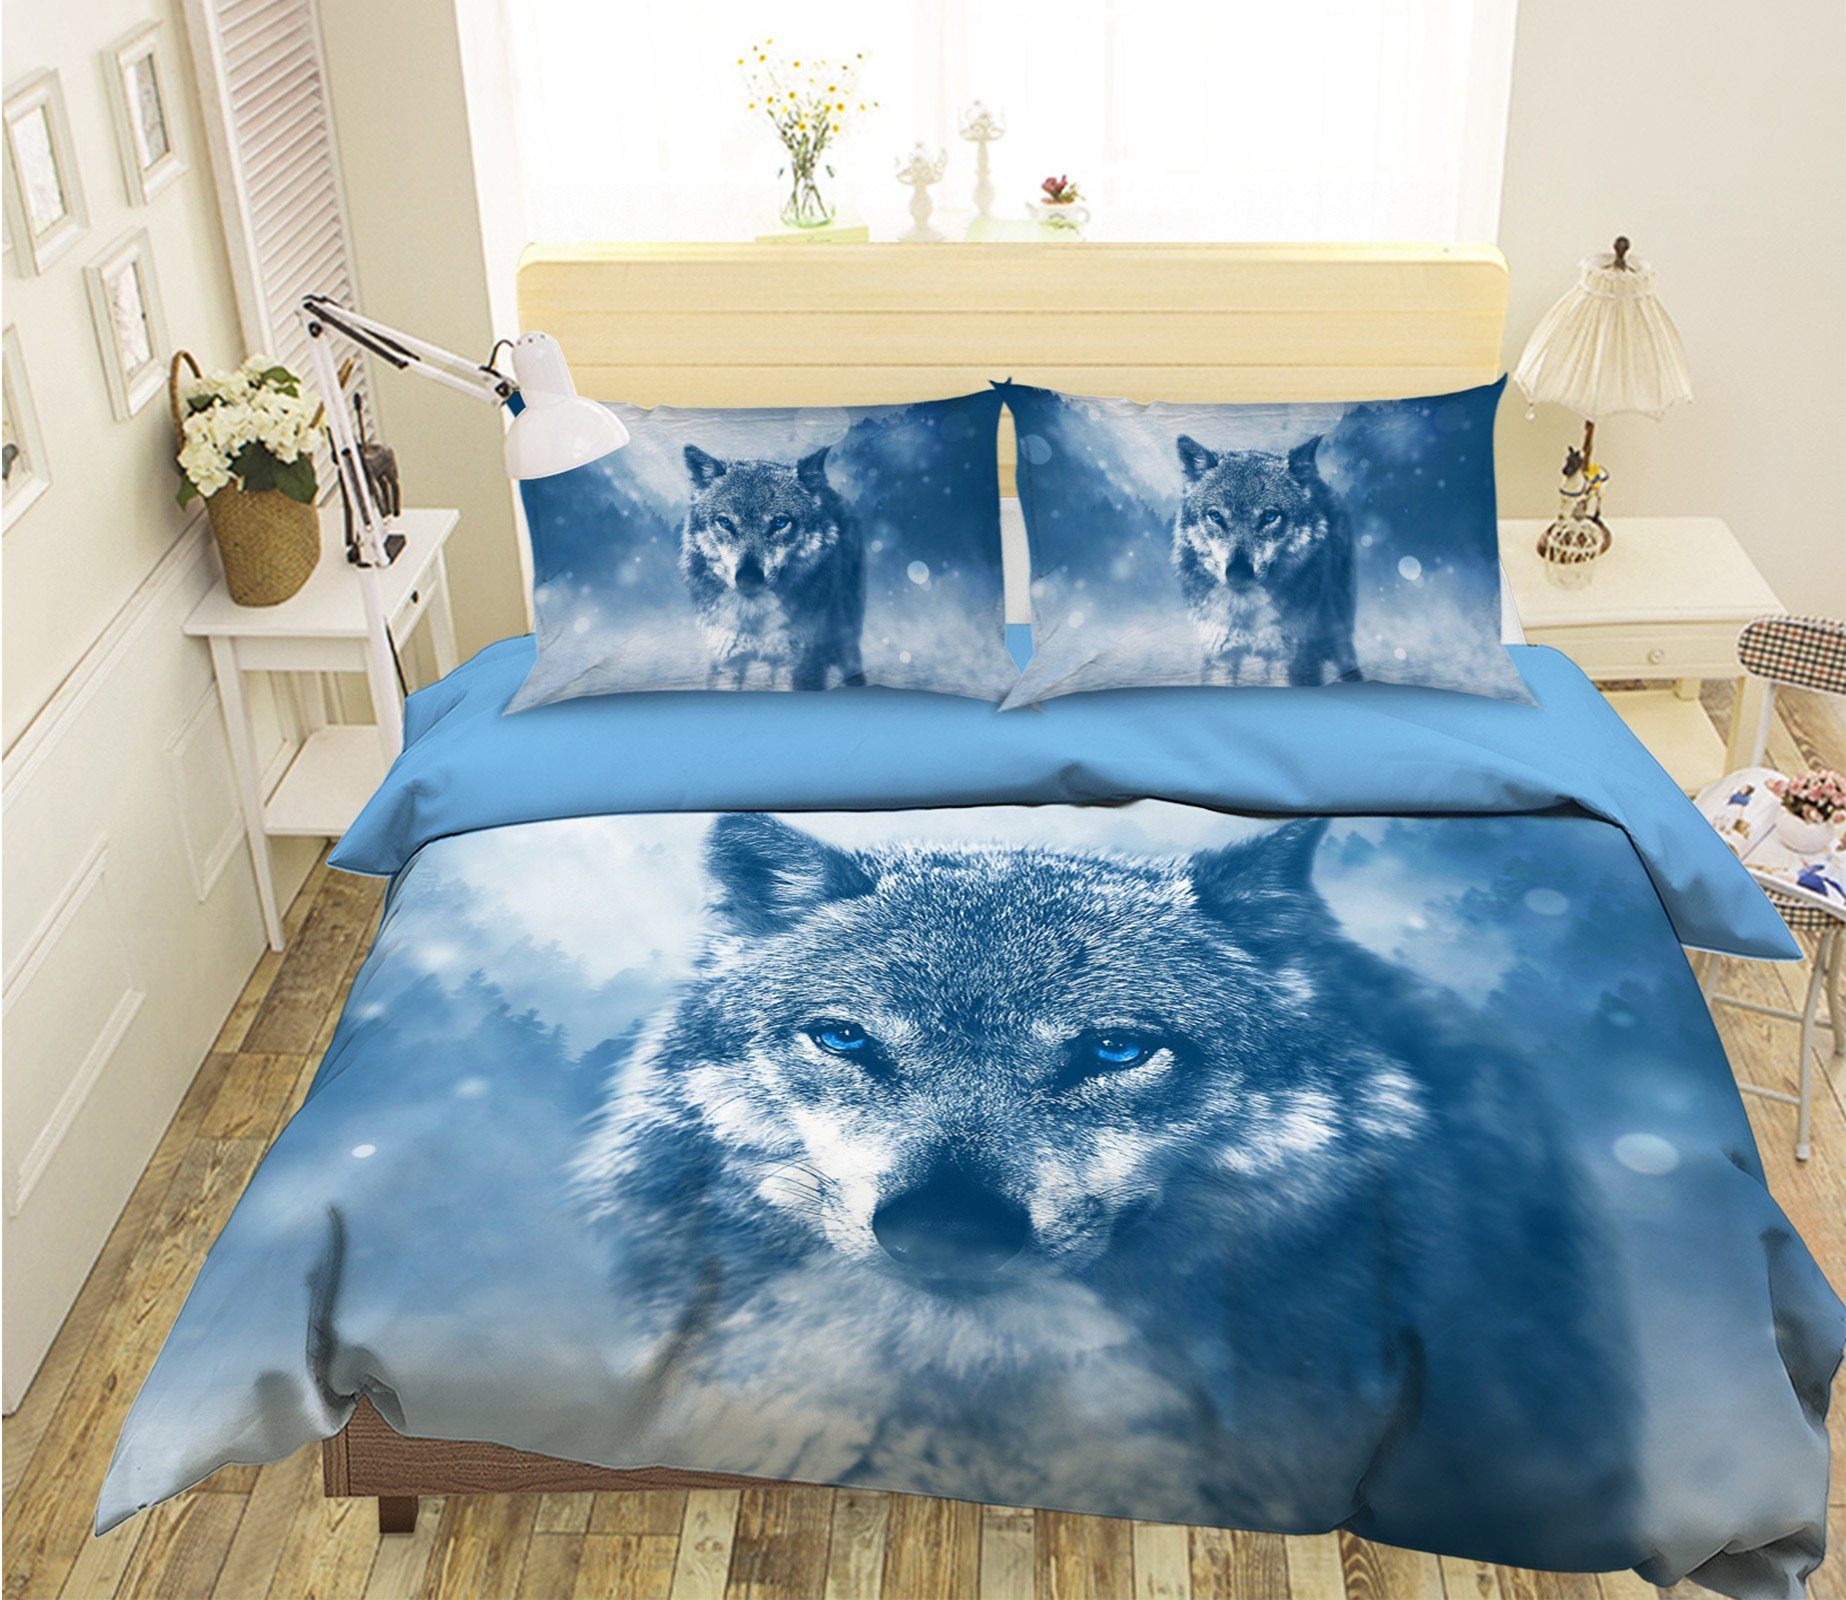 3D Snow Wolf 2011 Bed Pillowcases Quilt Quiet Covers AJ Creativity Home 